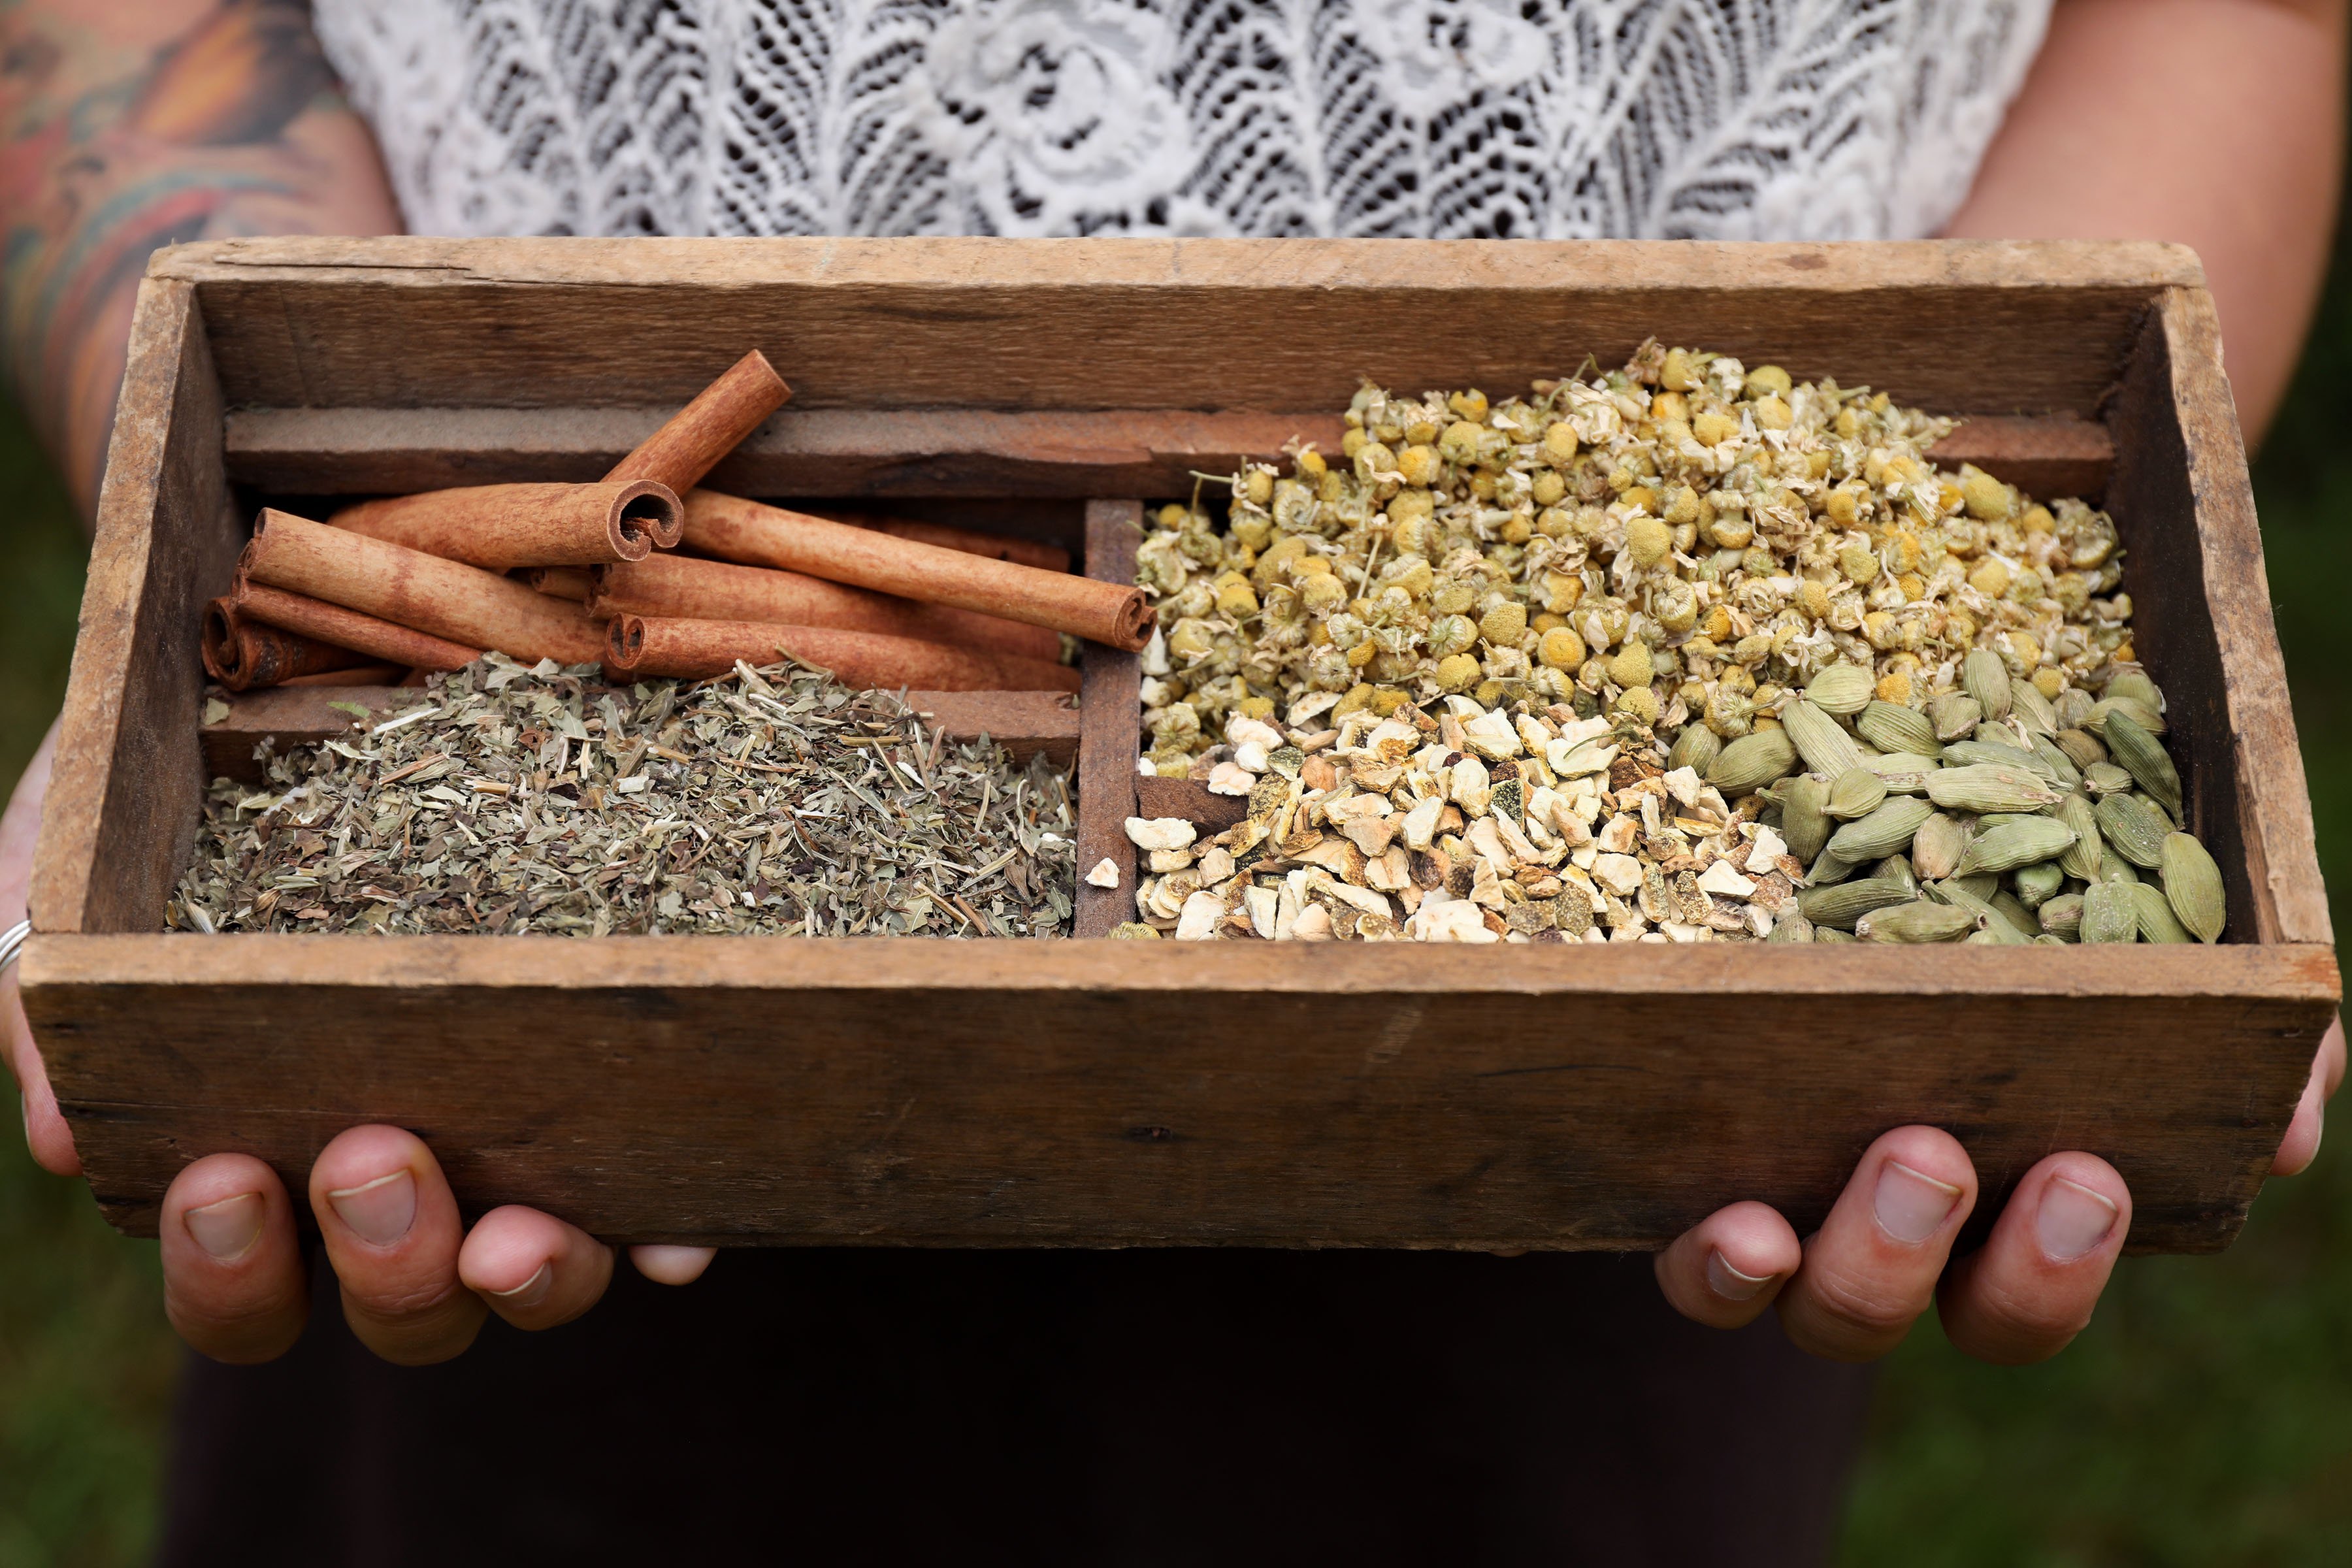 A wooden box filled with dried herbs including cinnamon sticks, chamomile flowers, cardamom pods, and dried roots and leaves. 